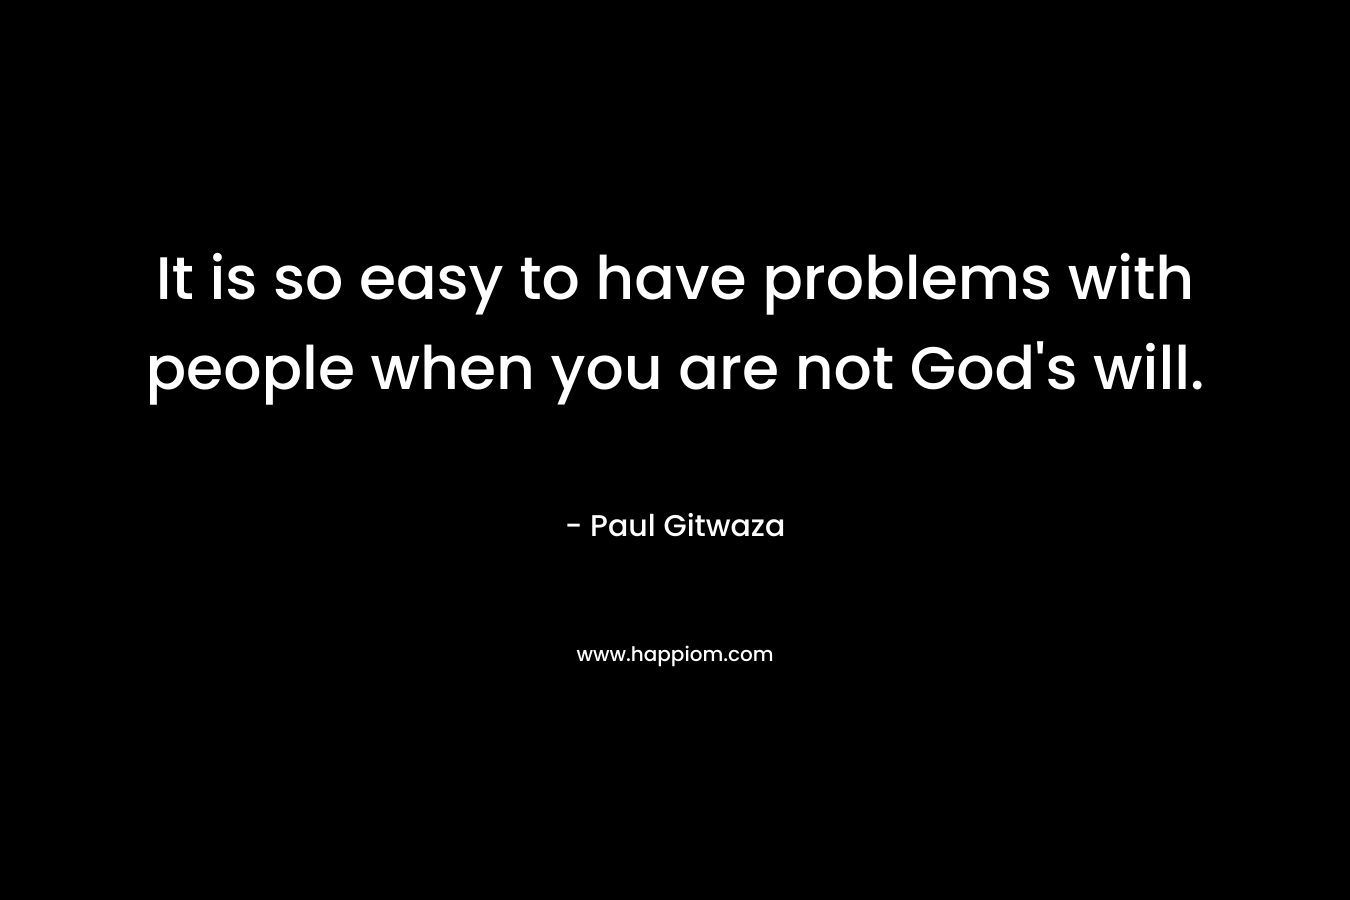 It is so easy to have problems with people when you are not God's will.